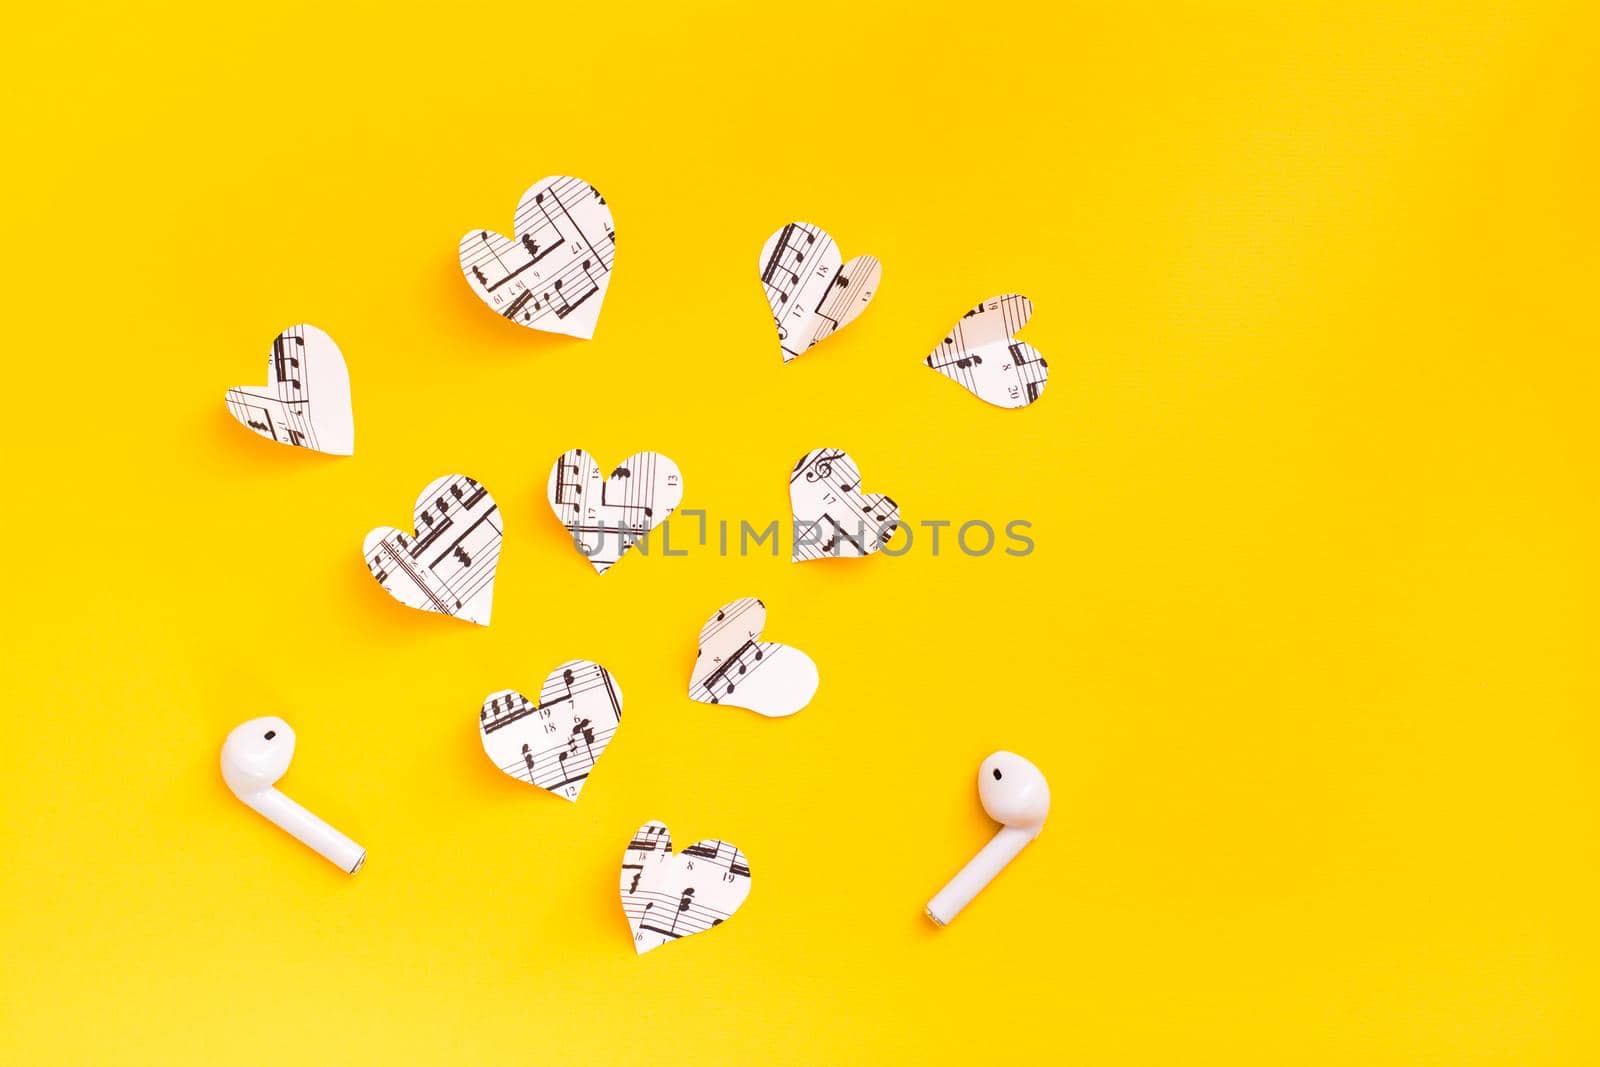 Wireless headphones and hearts cut from the music text on a yellow background. Love for music through gadgets. Copy space